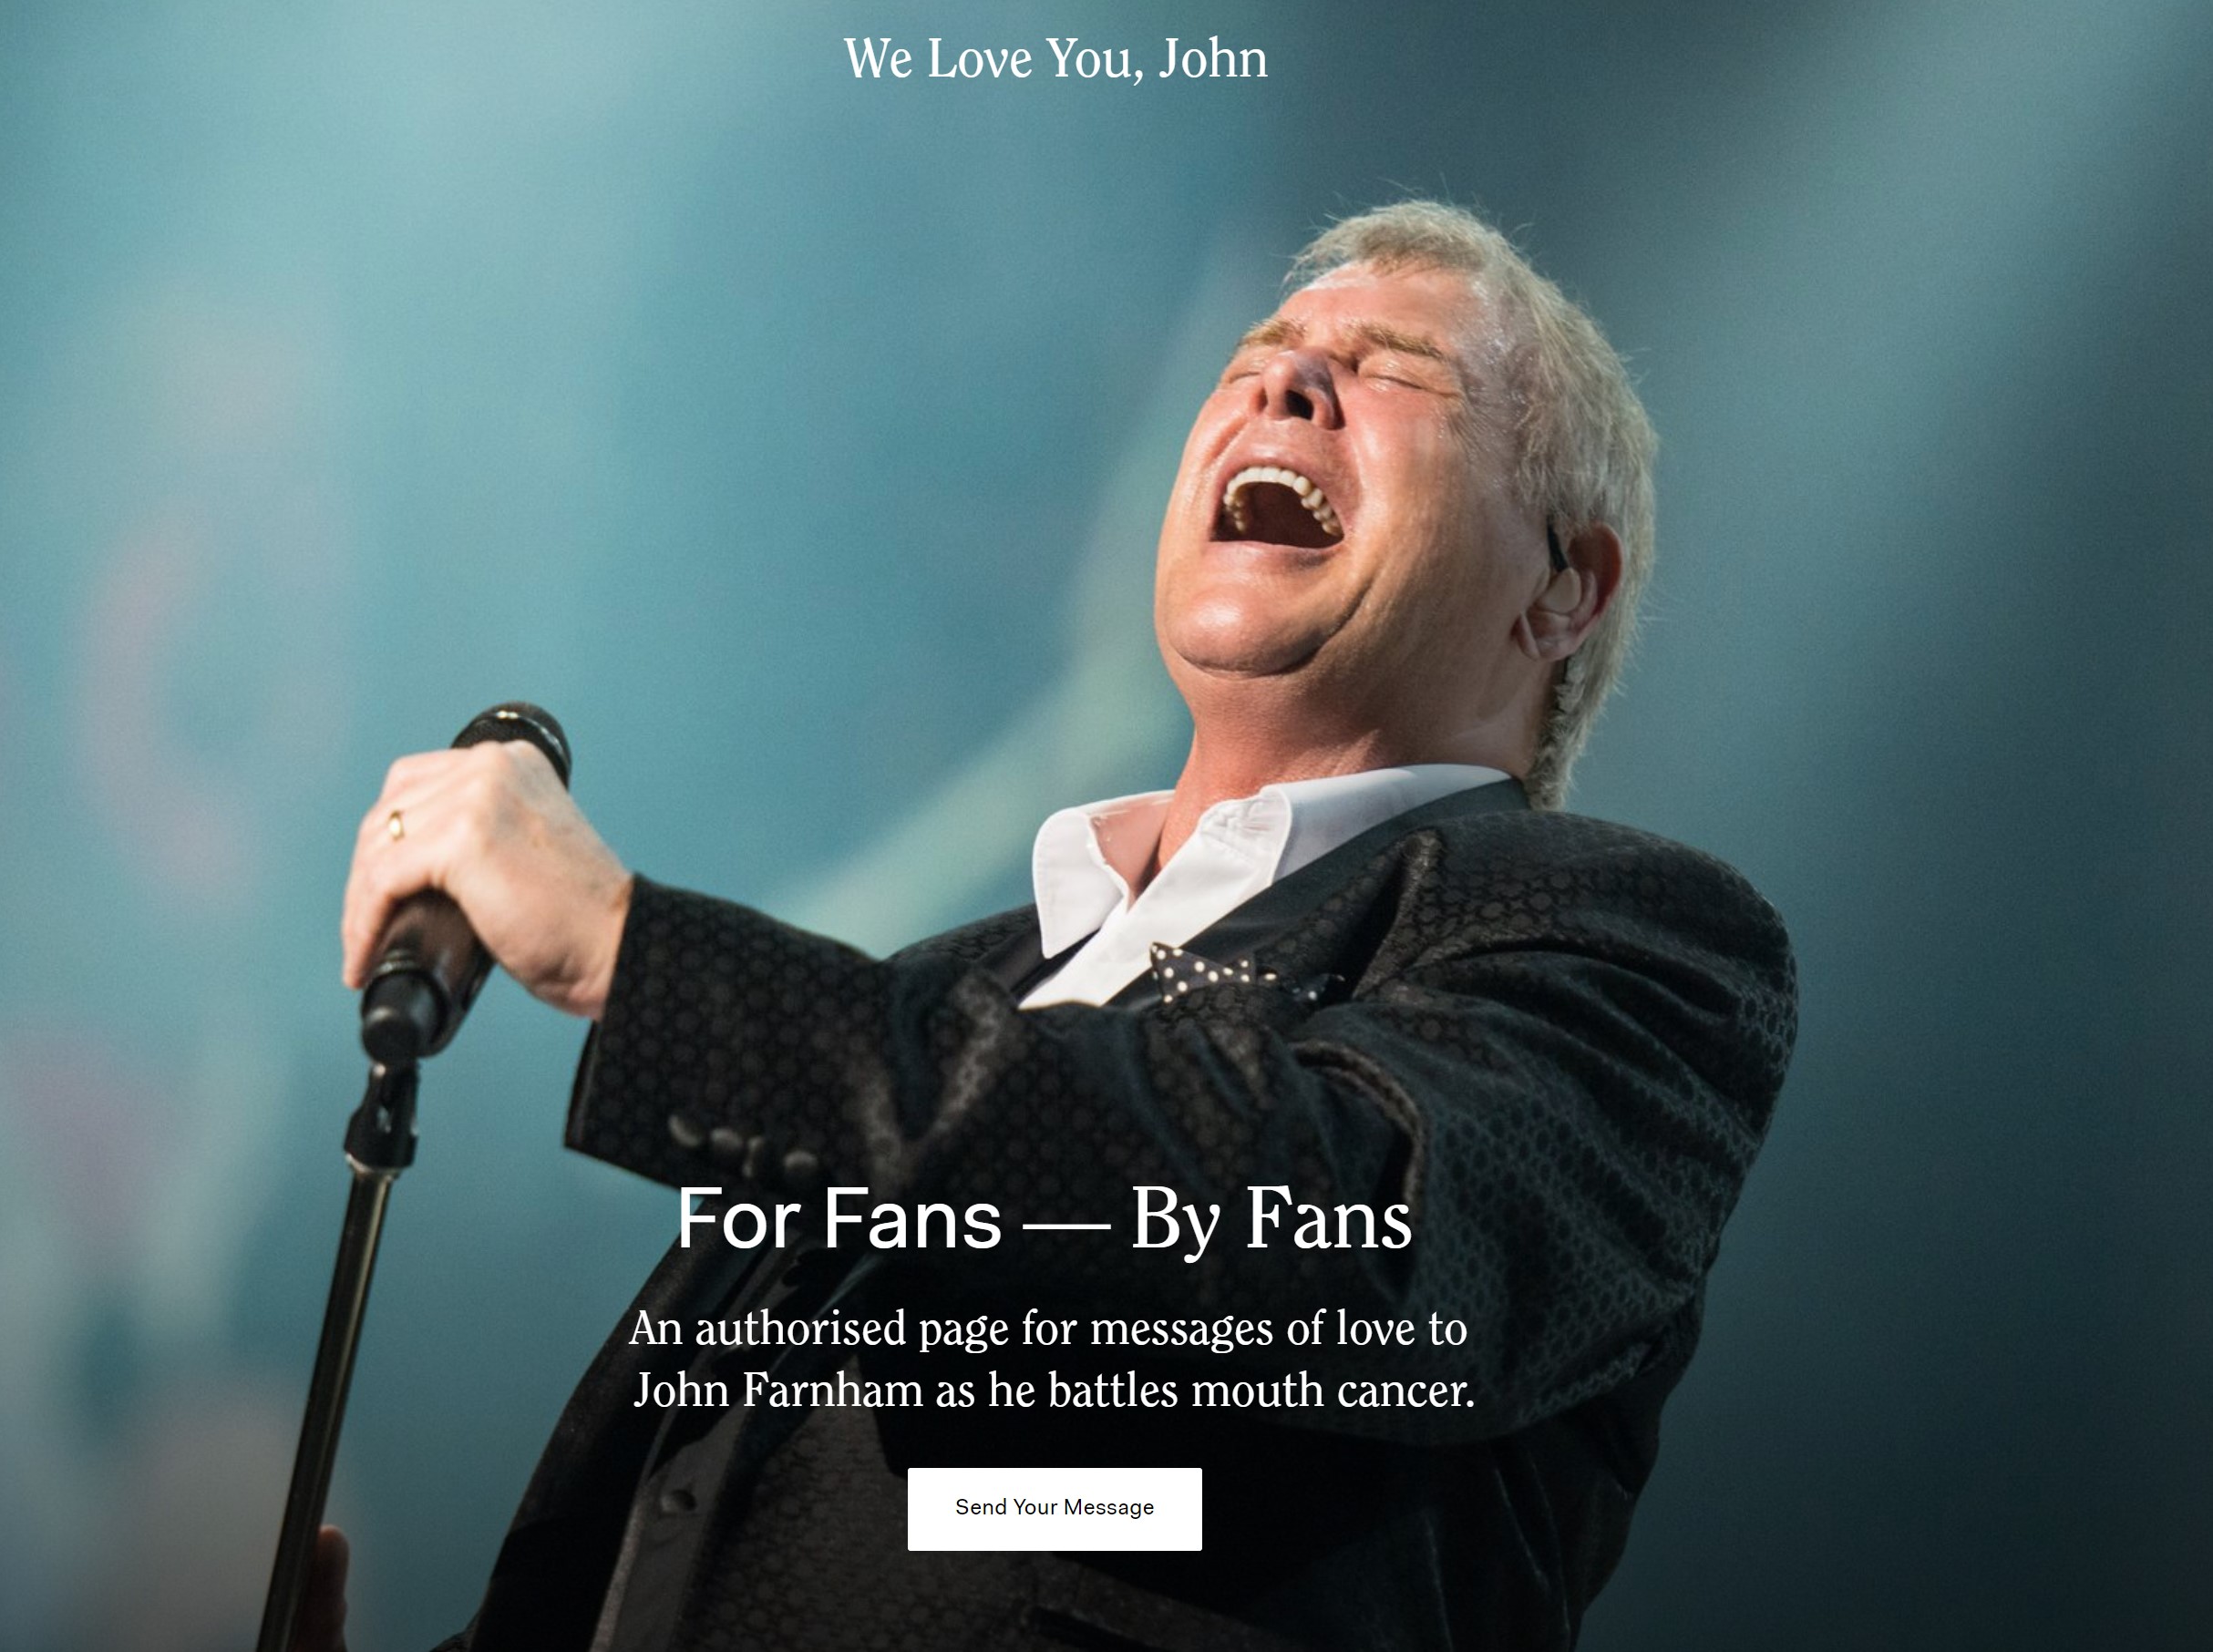 Fans can send messages to John Farnham as he recovers from surgery.